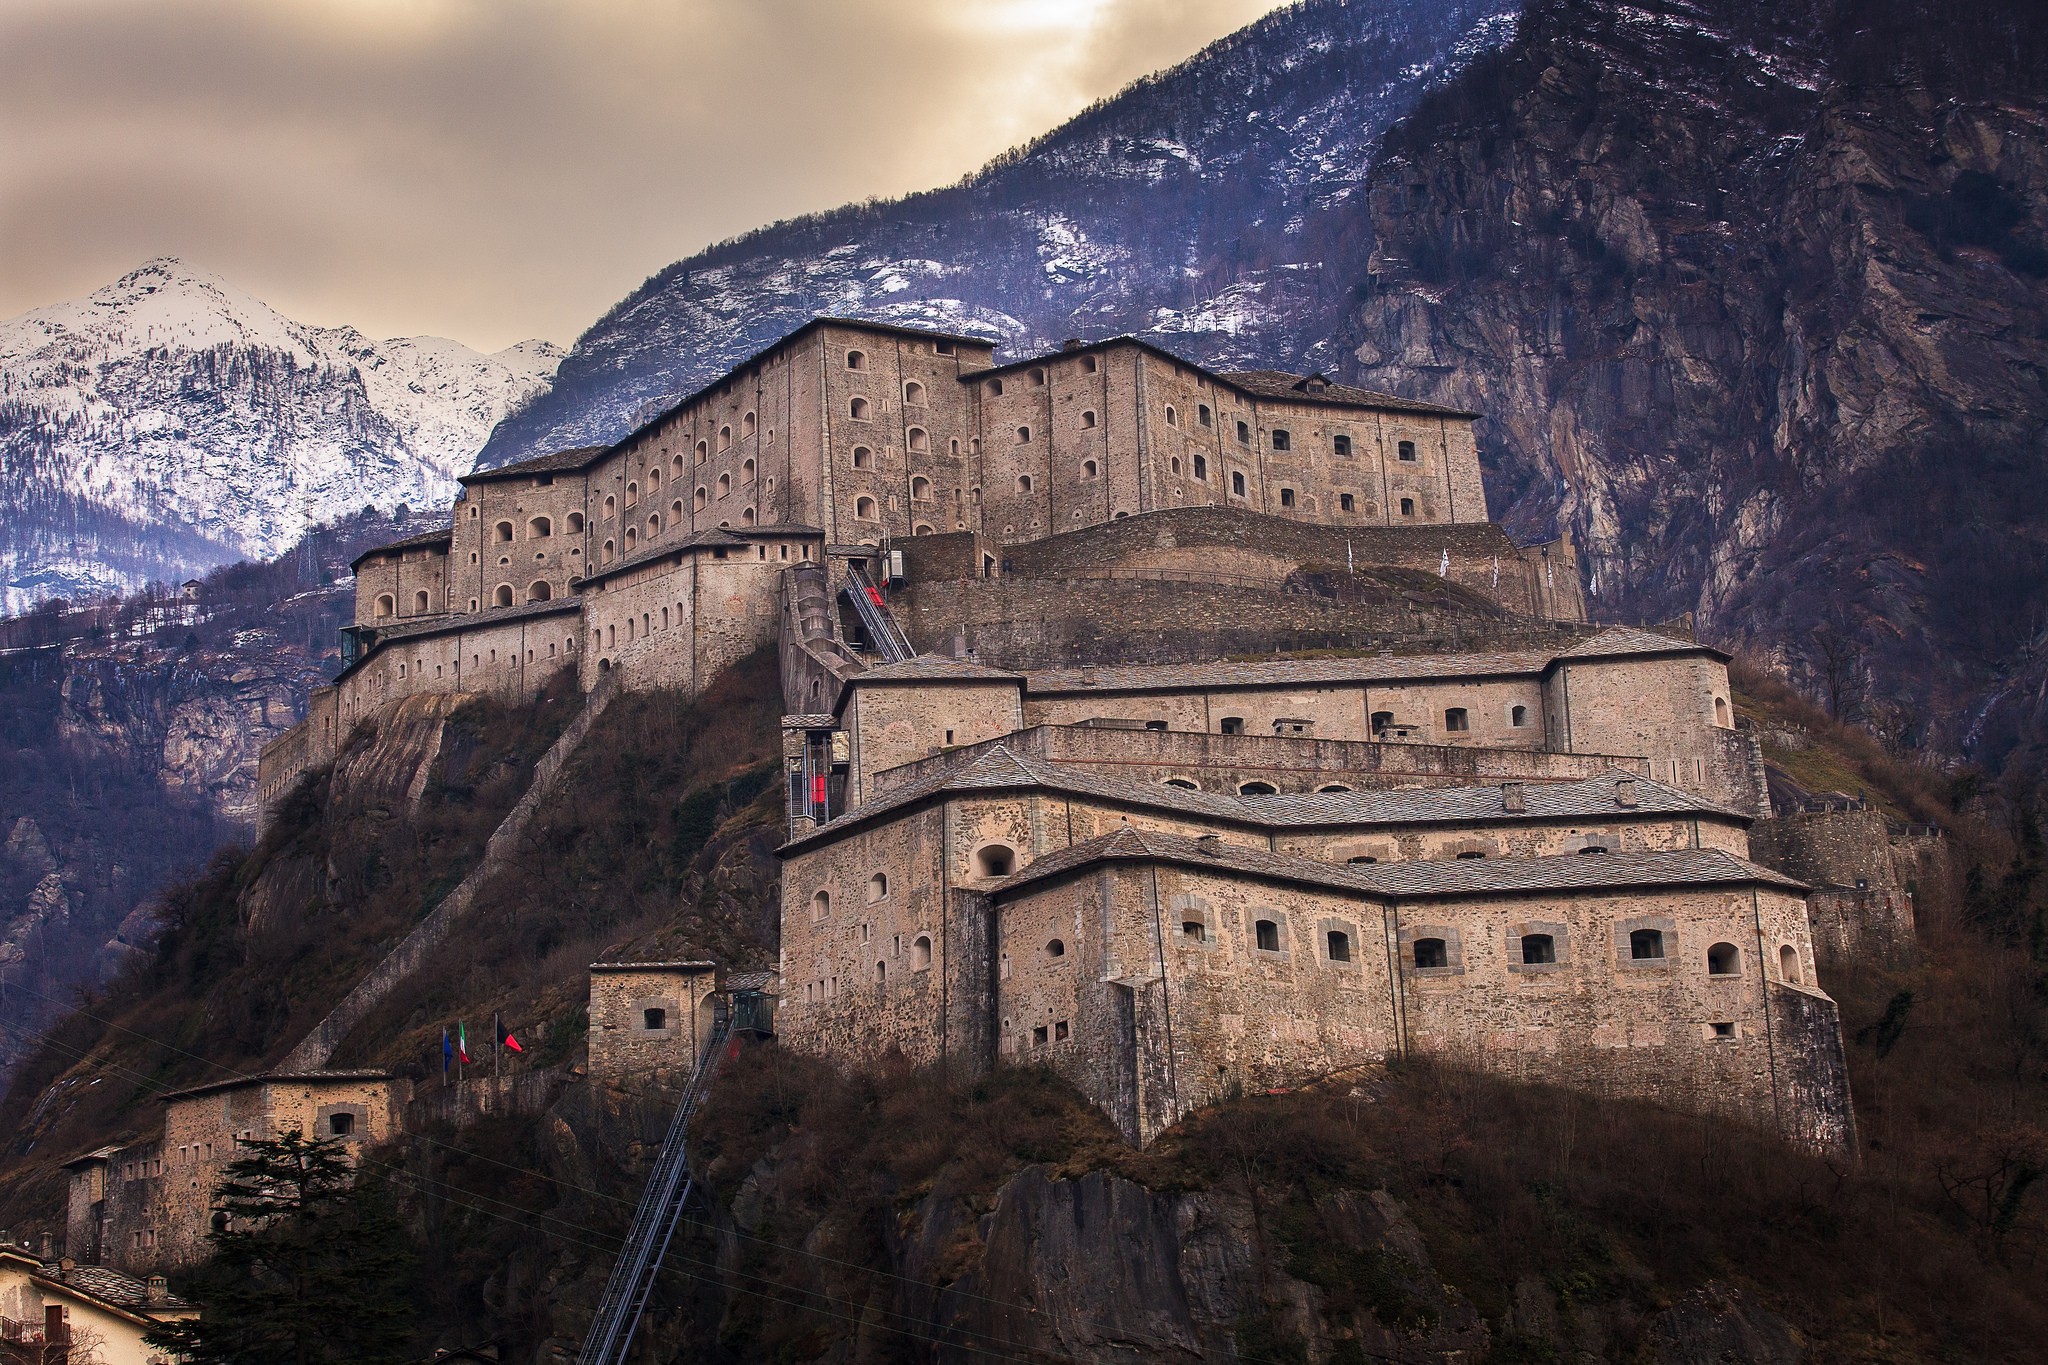 General 2048x1365 Italy castle mountains Alps fortress